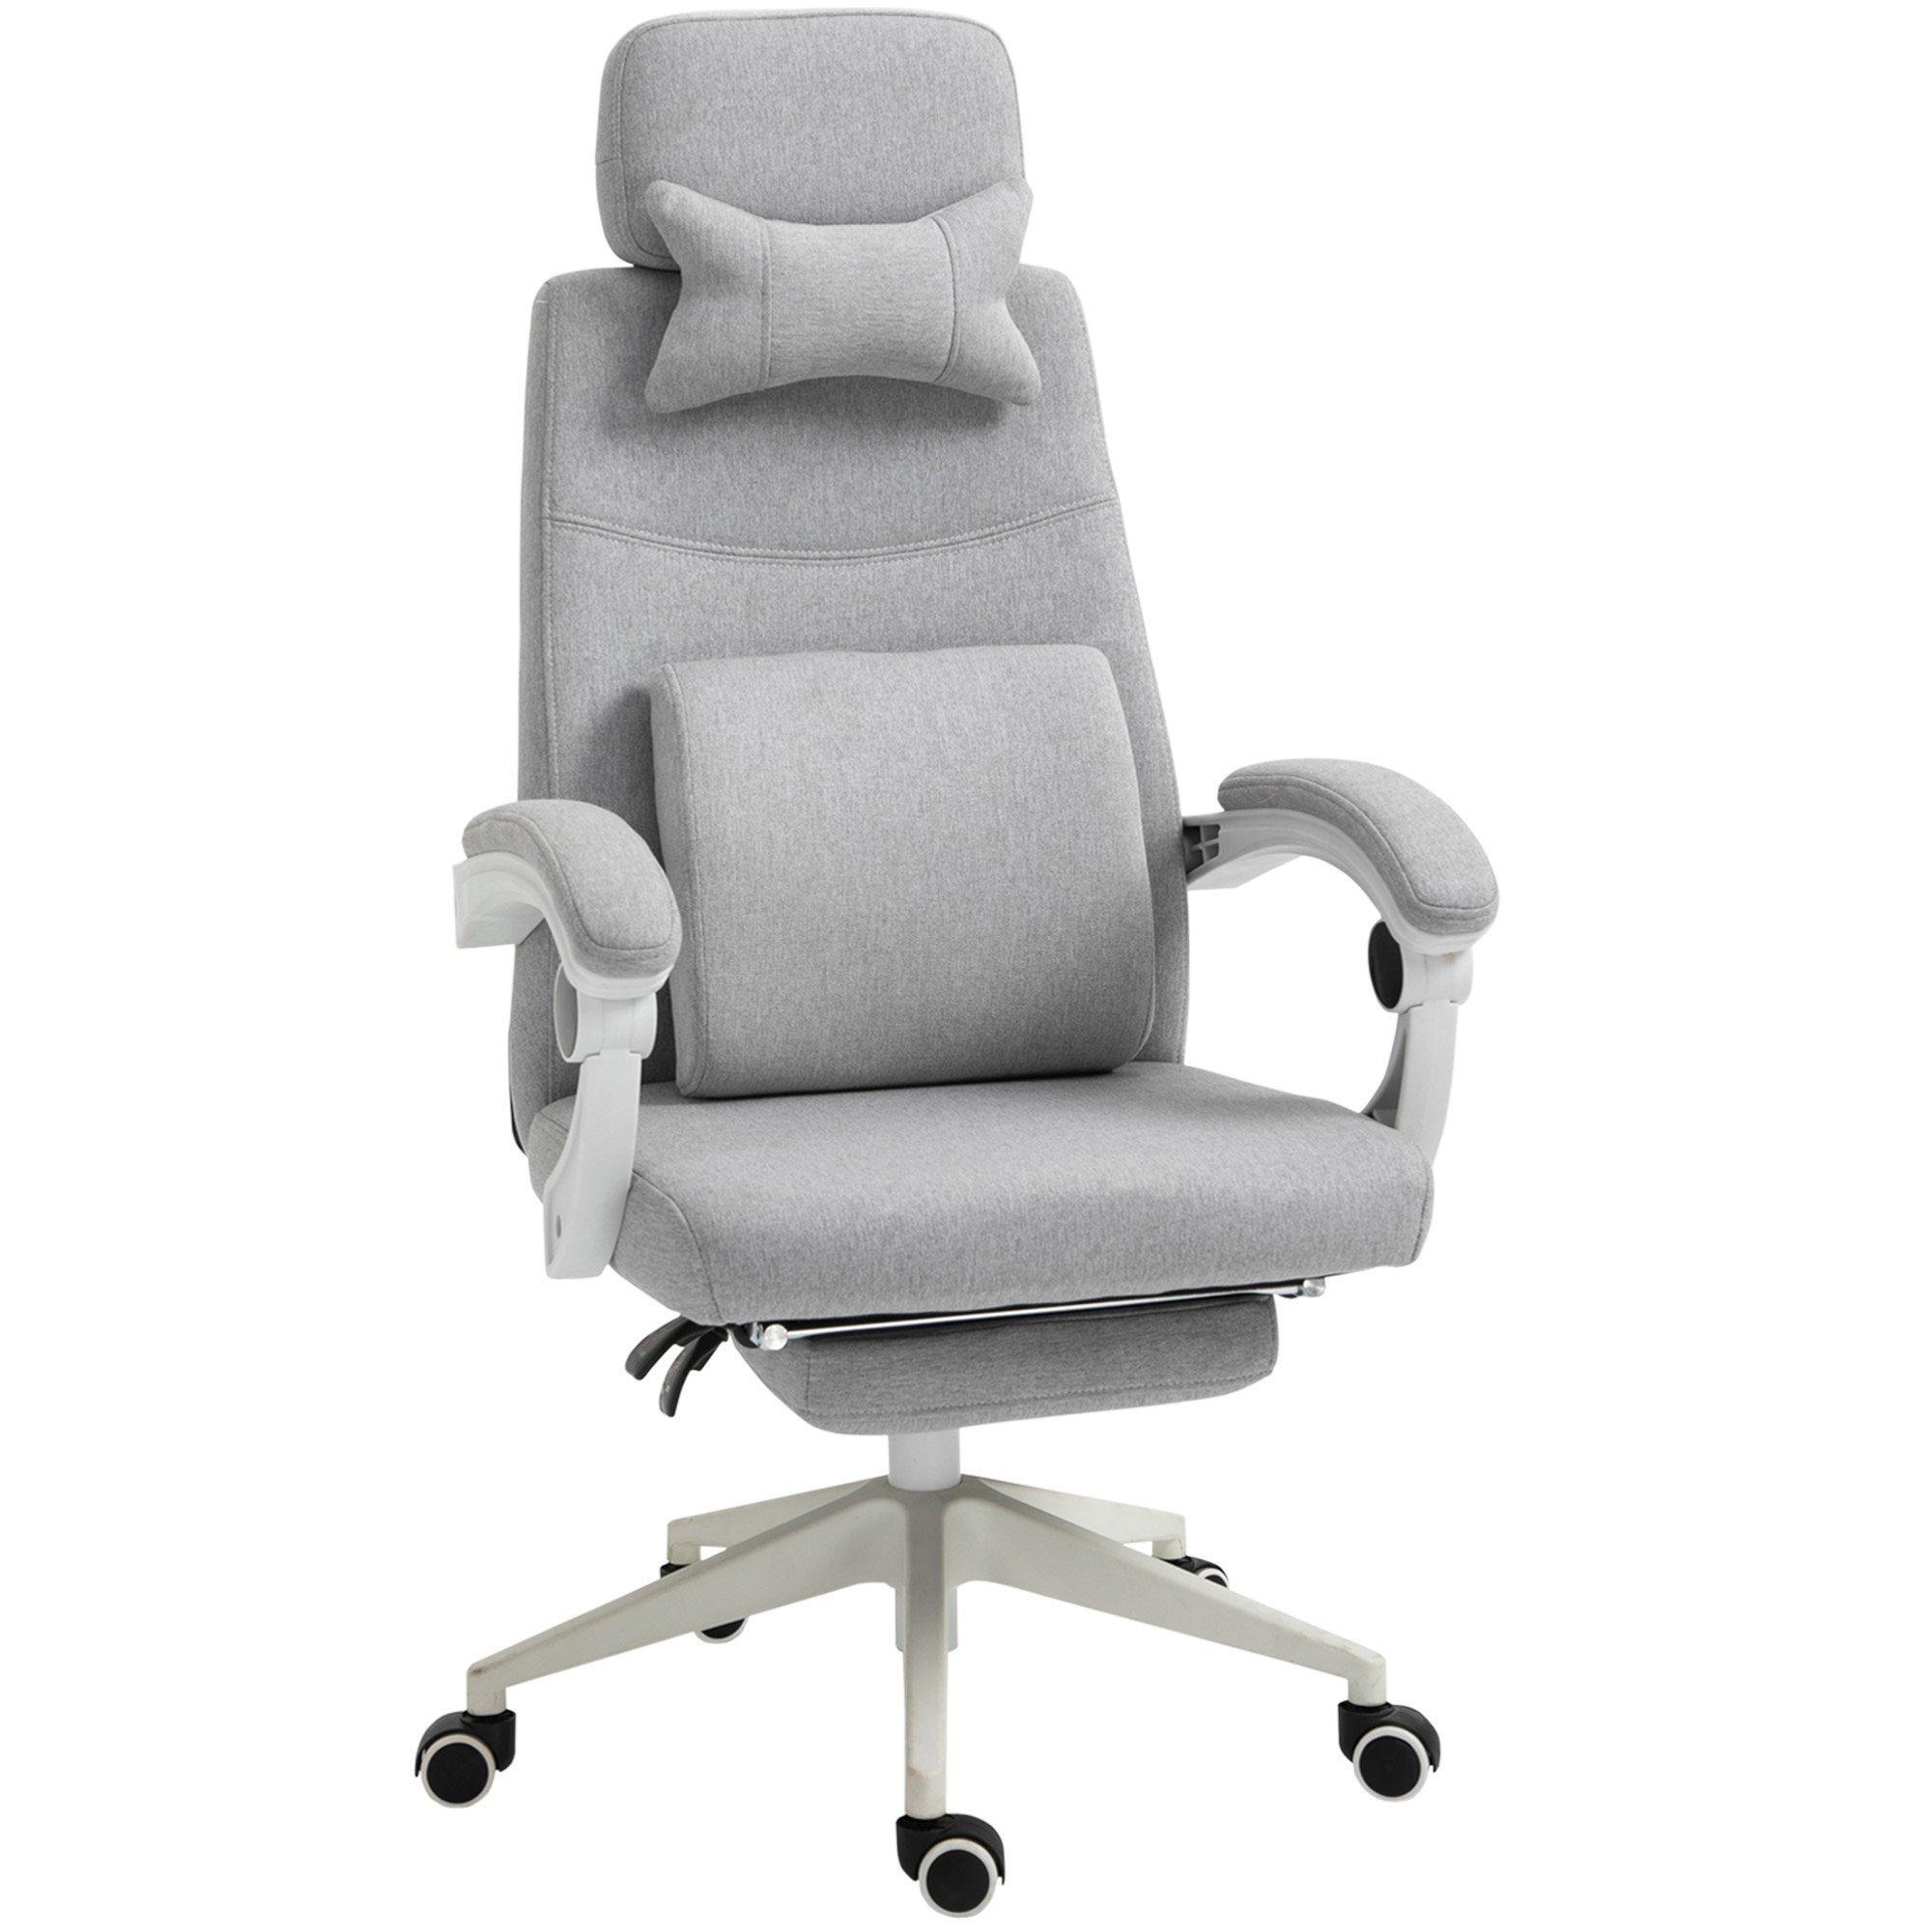 Ergonomic Home Office Chair with Footrest Height Adjustable - image 1